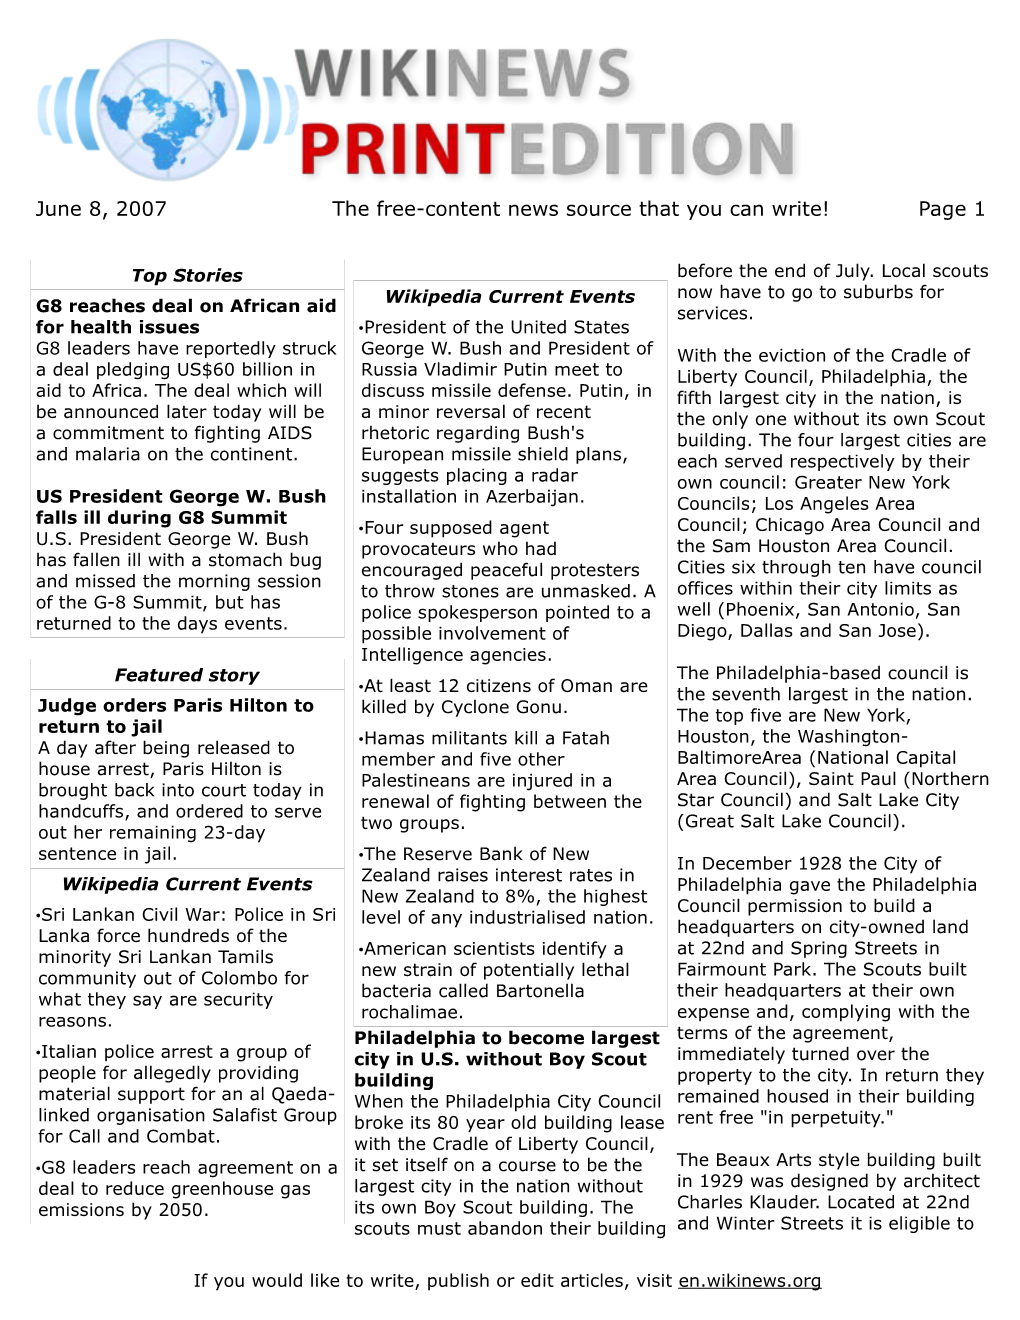 June 8, 2007 the Free-Content News Source That You Can Write! Page 1